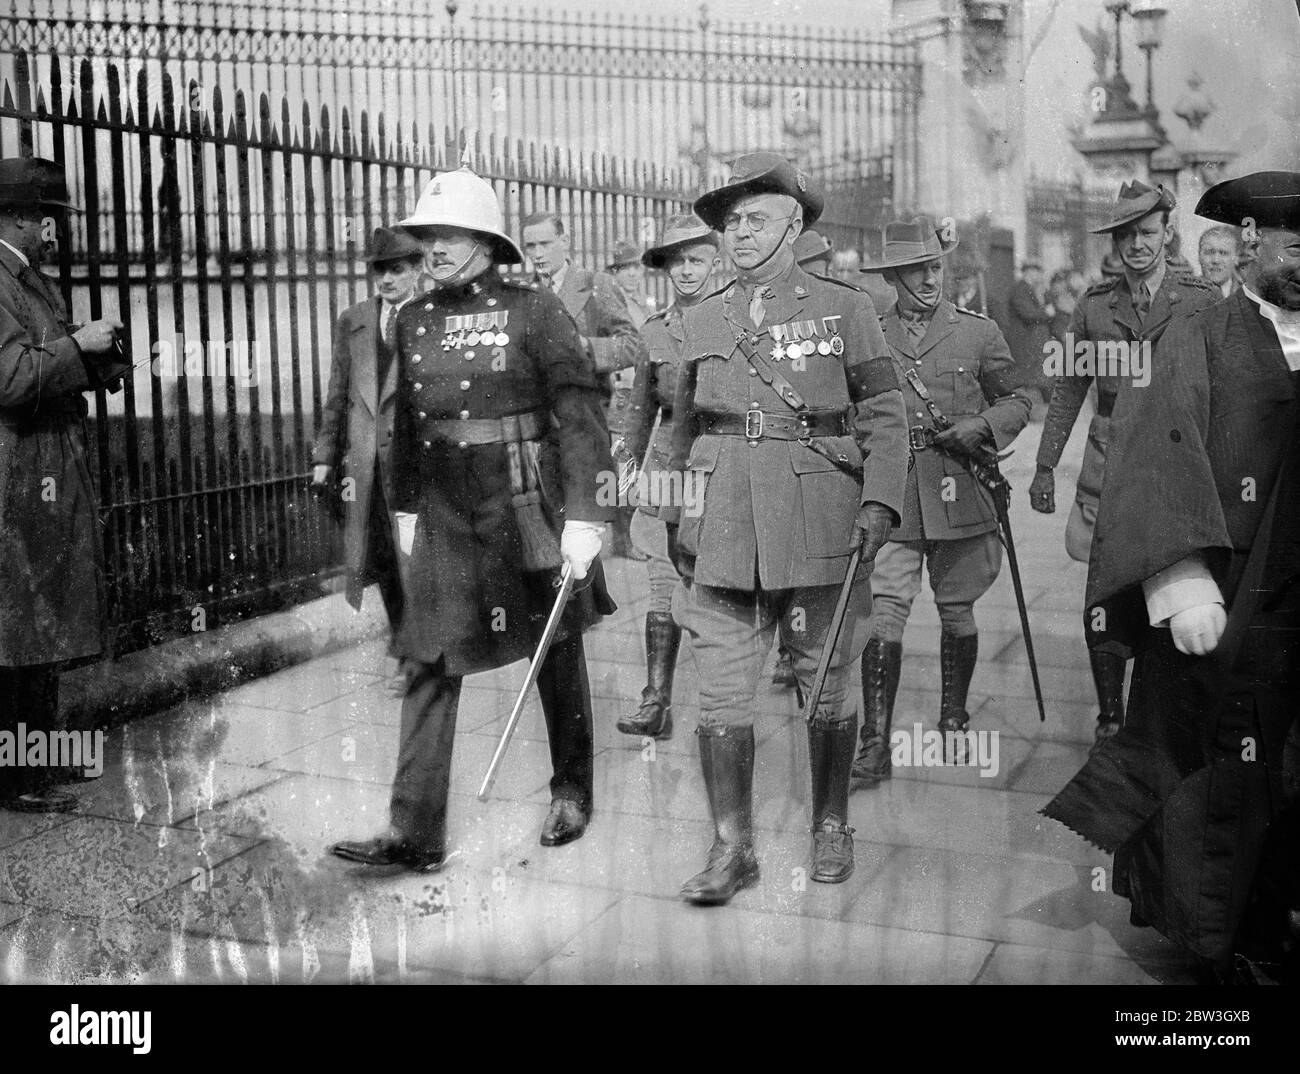 Australian officers at Buckingham Palace levee . For only the third time in 50 years a Levee was held at Buckingham Palace . The levee council is meeting at St James Palace , the King decided to hold the Levee at Buckingham Palace instead . Photo shows , Lieut Col E K Smart , Australian Staff Corps and Colonel P E G Leary of the Australian Medical Staff , leaving after the Levee . 18 March 1936 Stock Photo